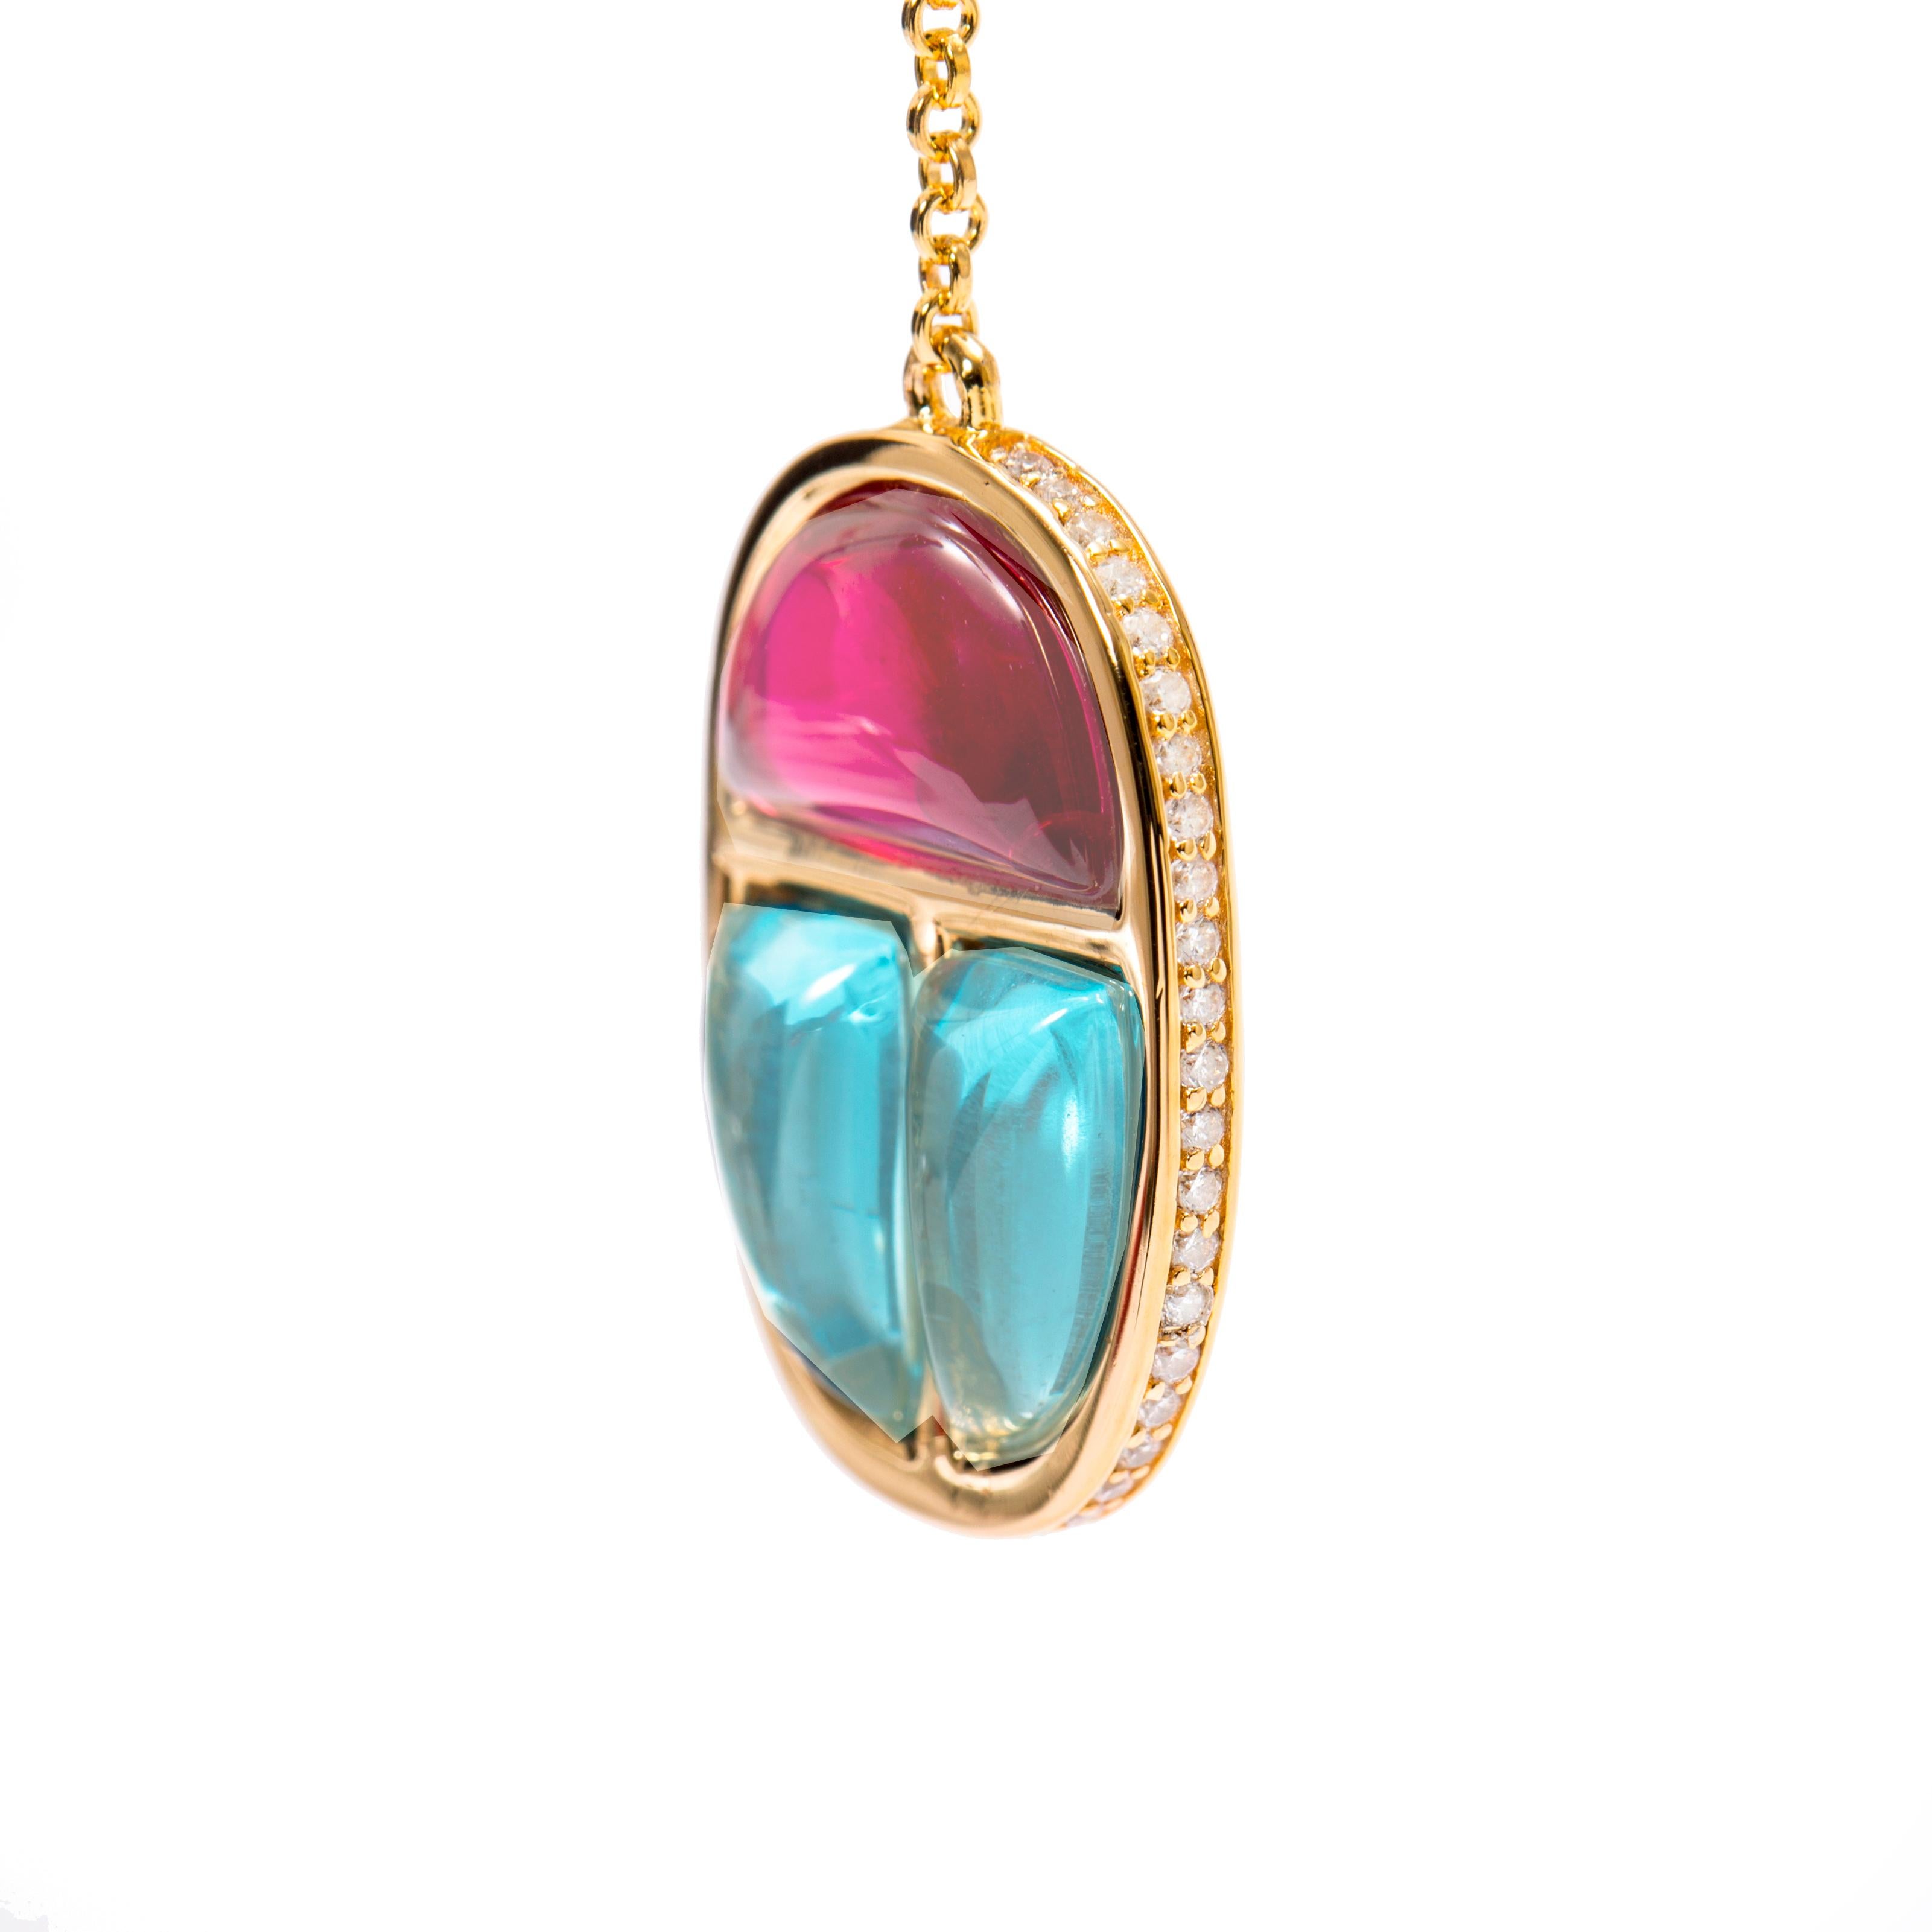 AMMANII's founder Amany Shaker, designer, is the Winner of the 2020 FTA International Award in the Jewelry category. The scarab earrings is part of Maklikat = Queens Collection- Inspired by the female ruling queens of Ancient Egypt. The Scarab